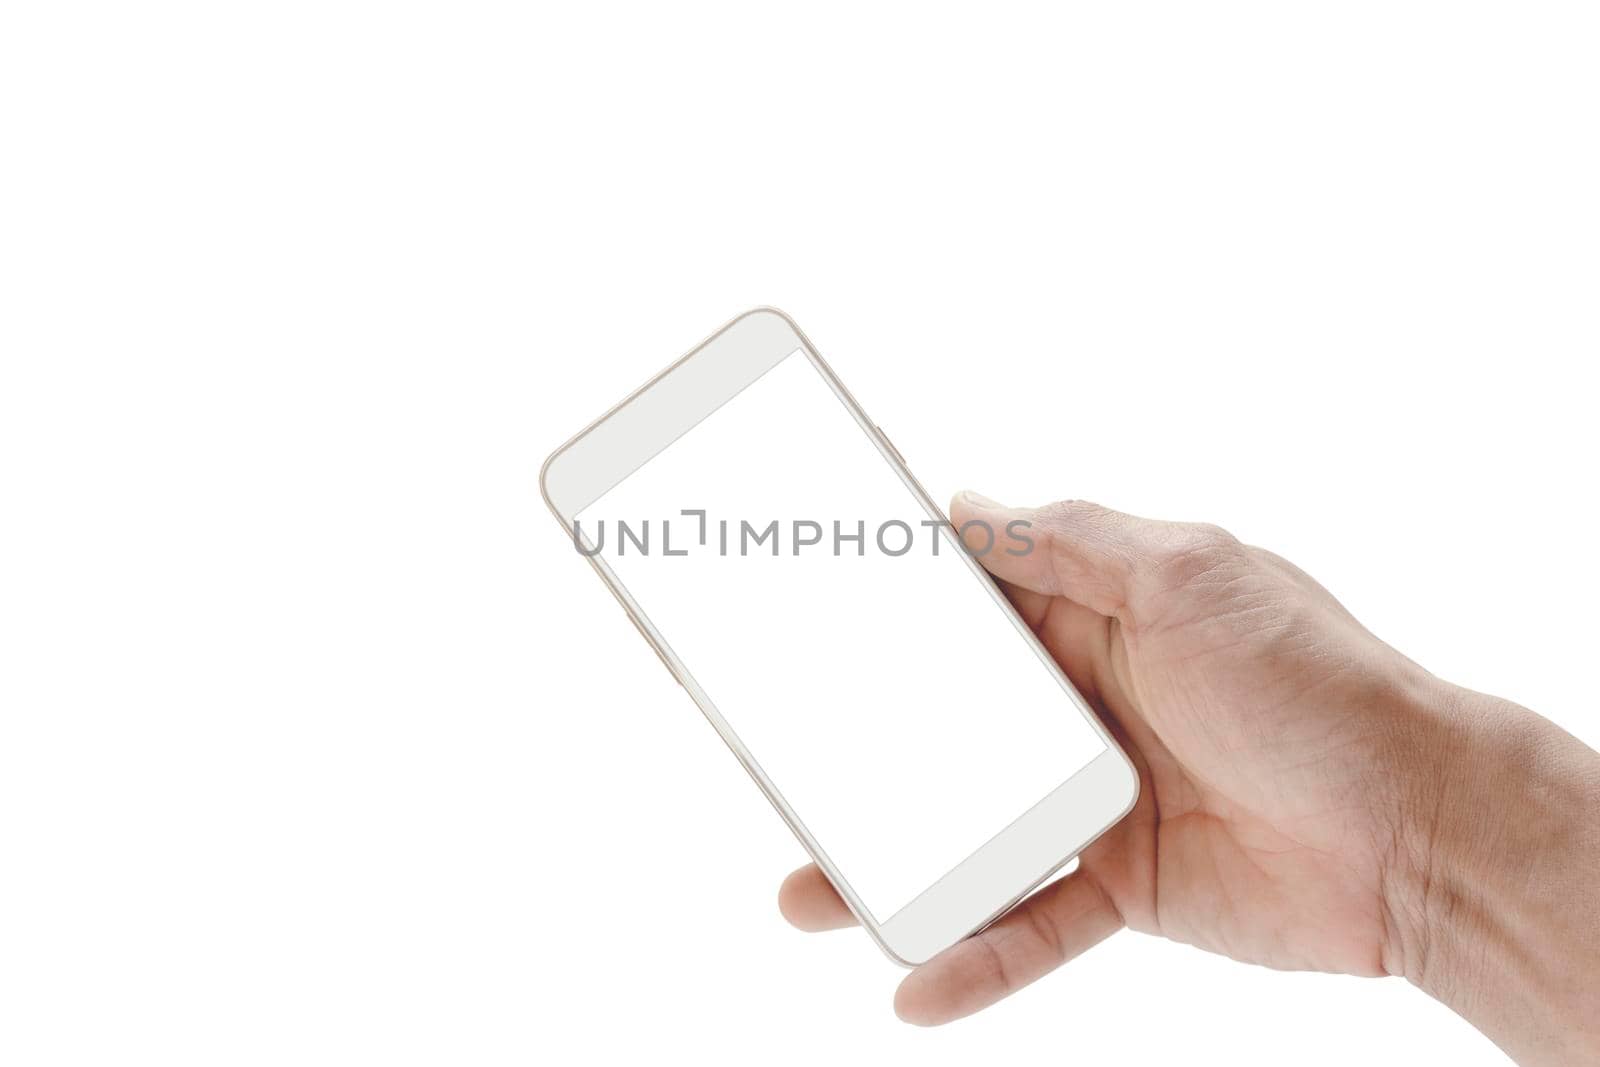  Mobile phone mockup, white screen with man hand holding smartphone and using touching screen isolated on white background, copy space with clipping path.         by yodsawai